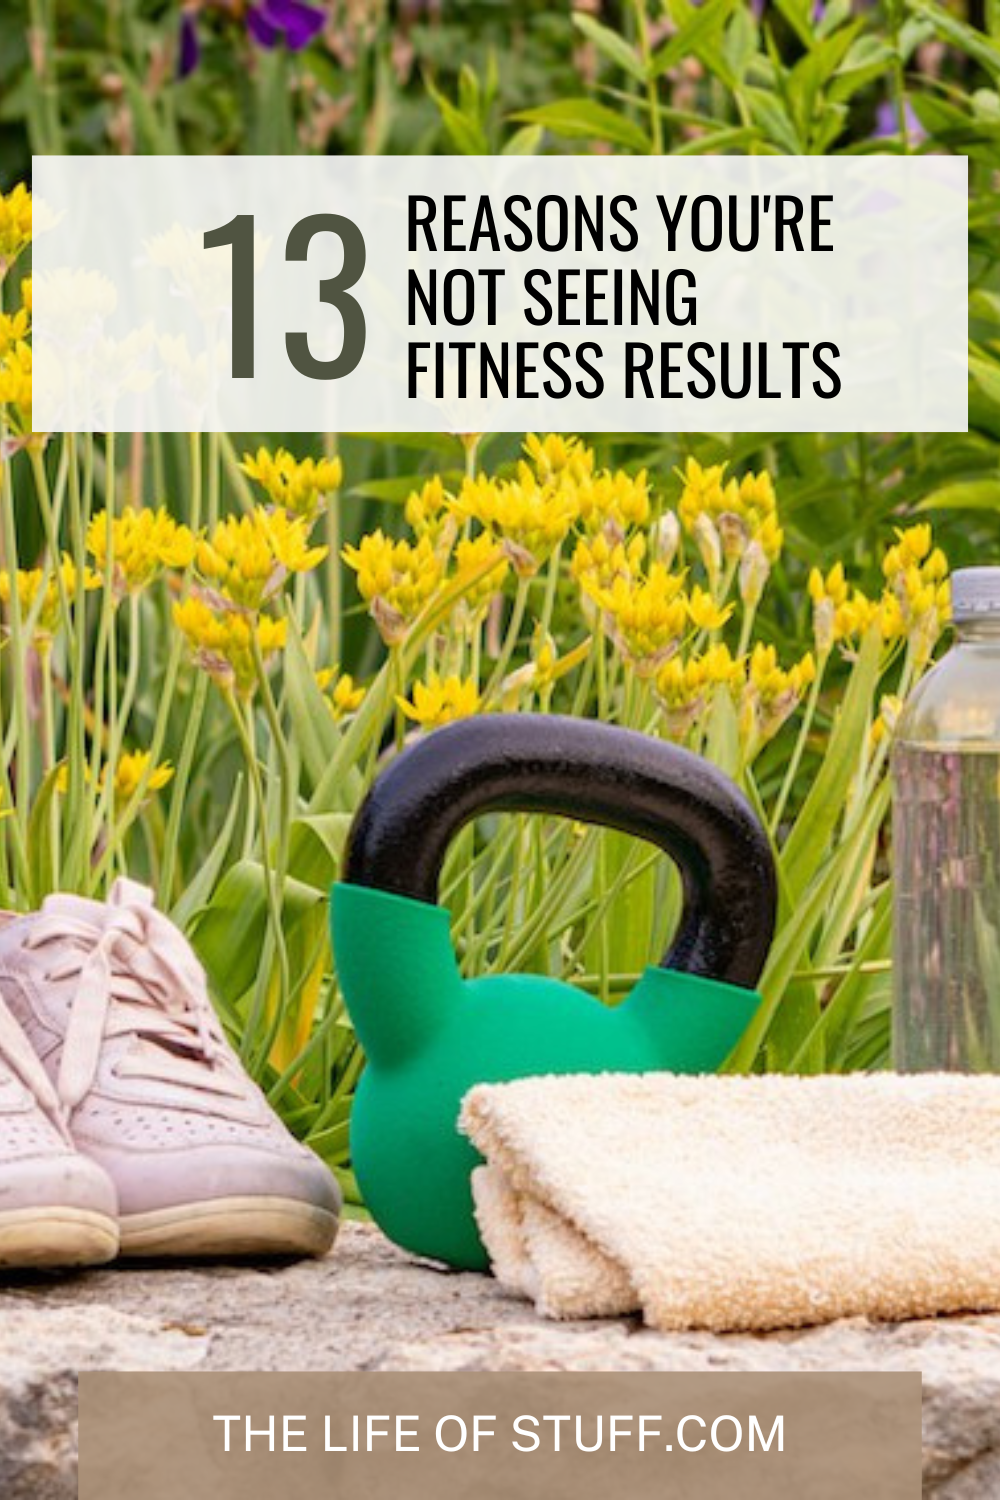 13 Reasons You're Not Seeing Fitness Results - The Life of Stuff